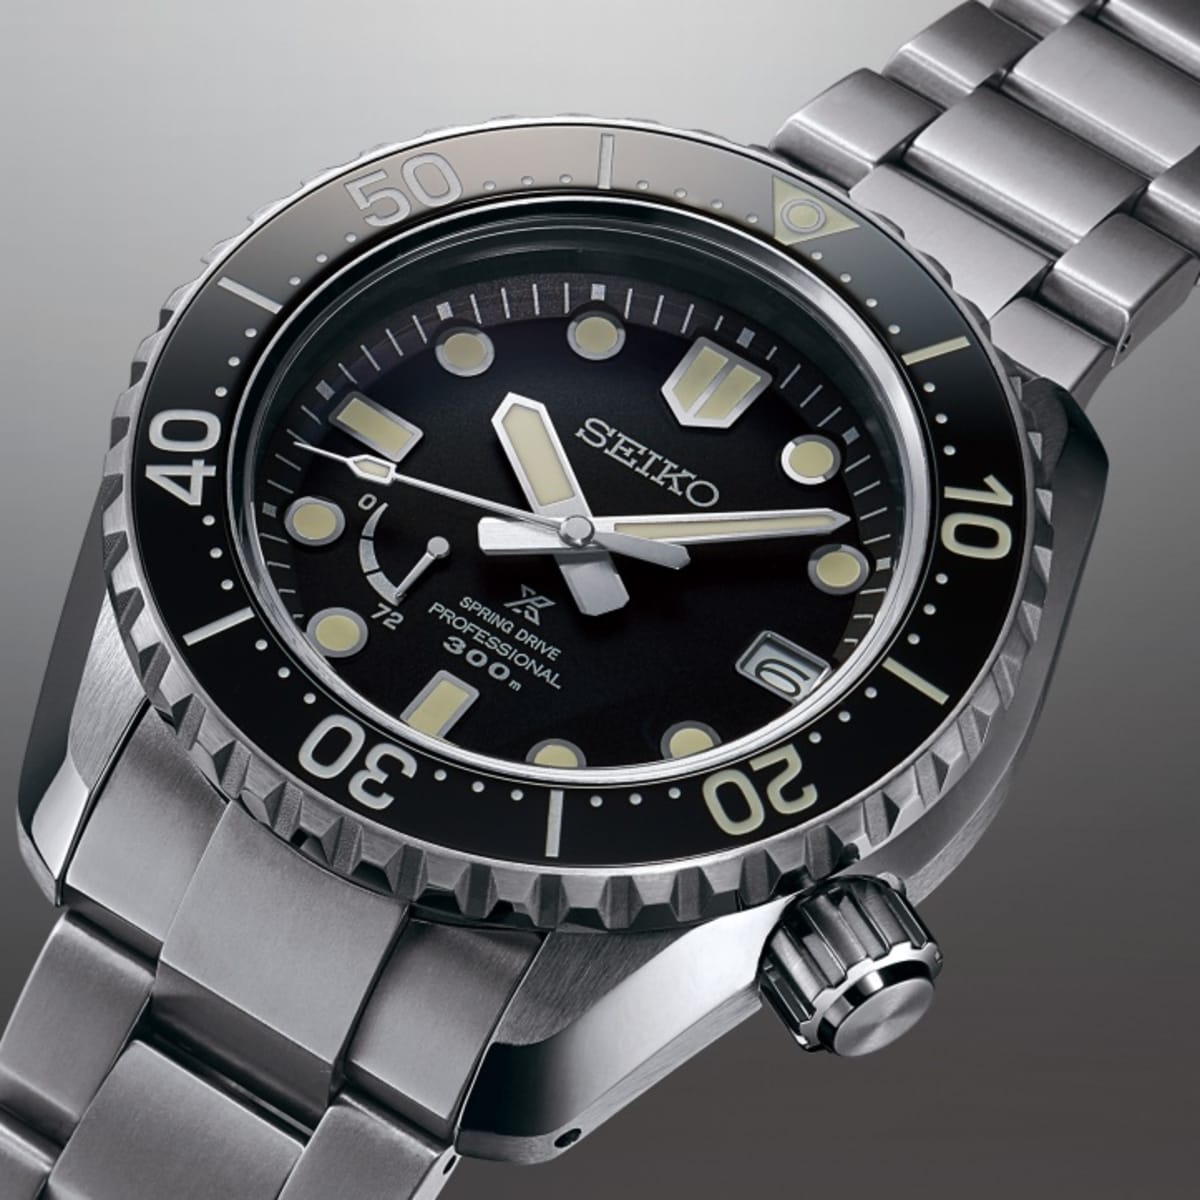 Seiko Prospex LX Line Diver's Watch Is a New Take on a Classic - Men's  Journal